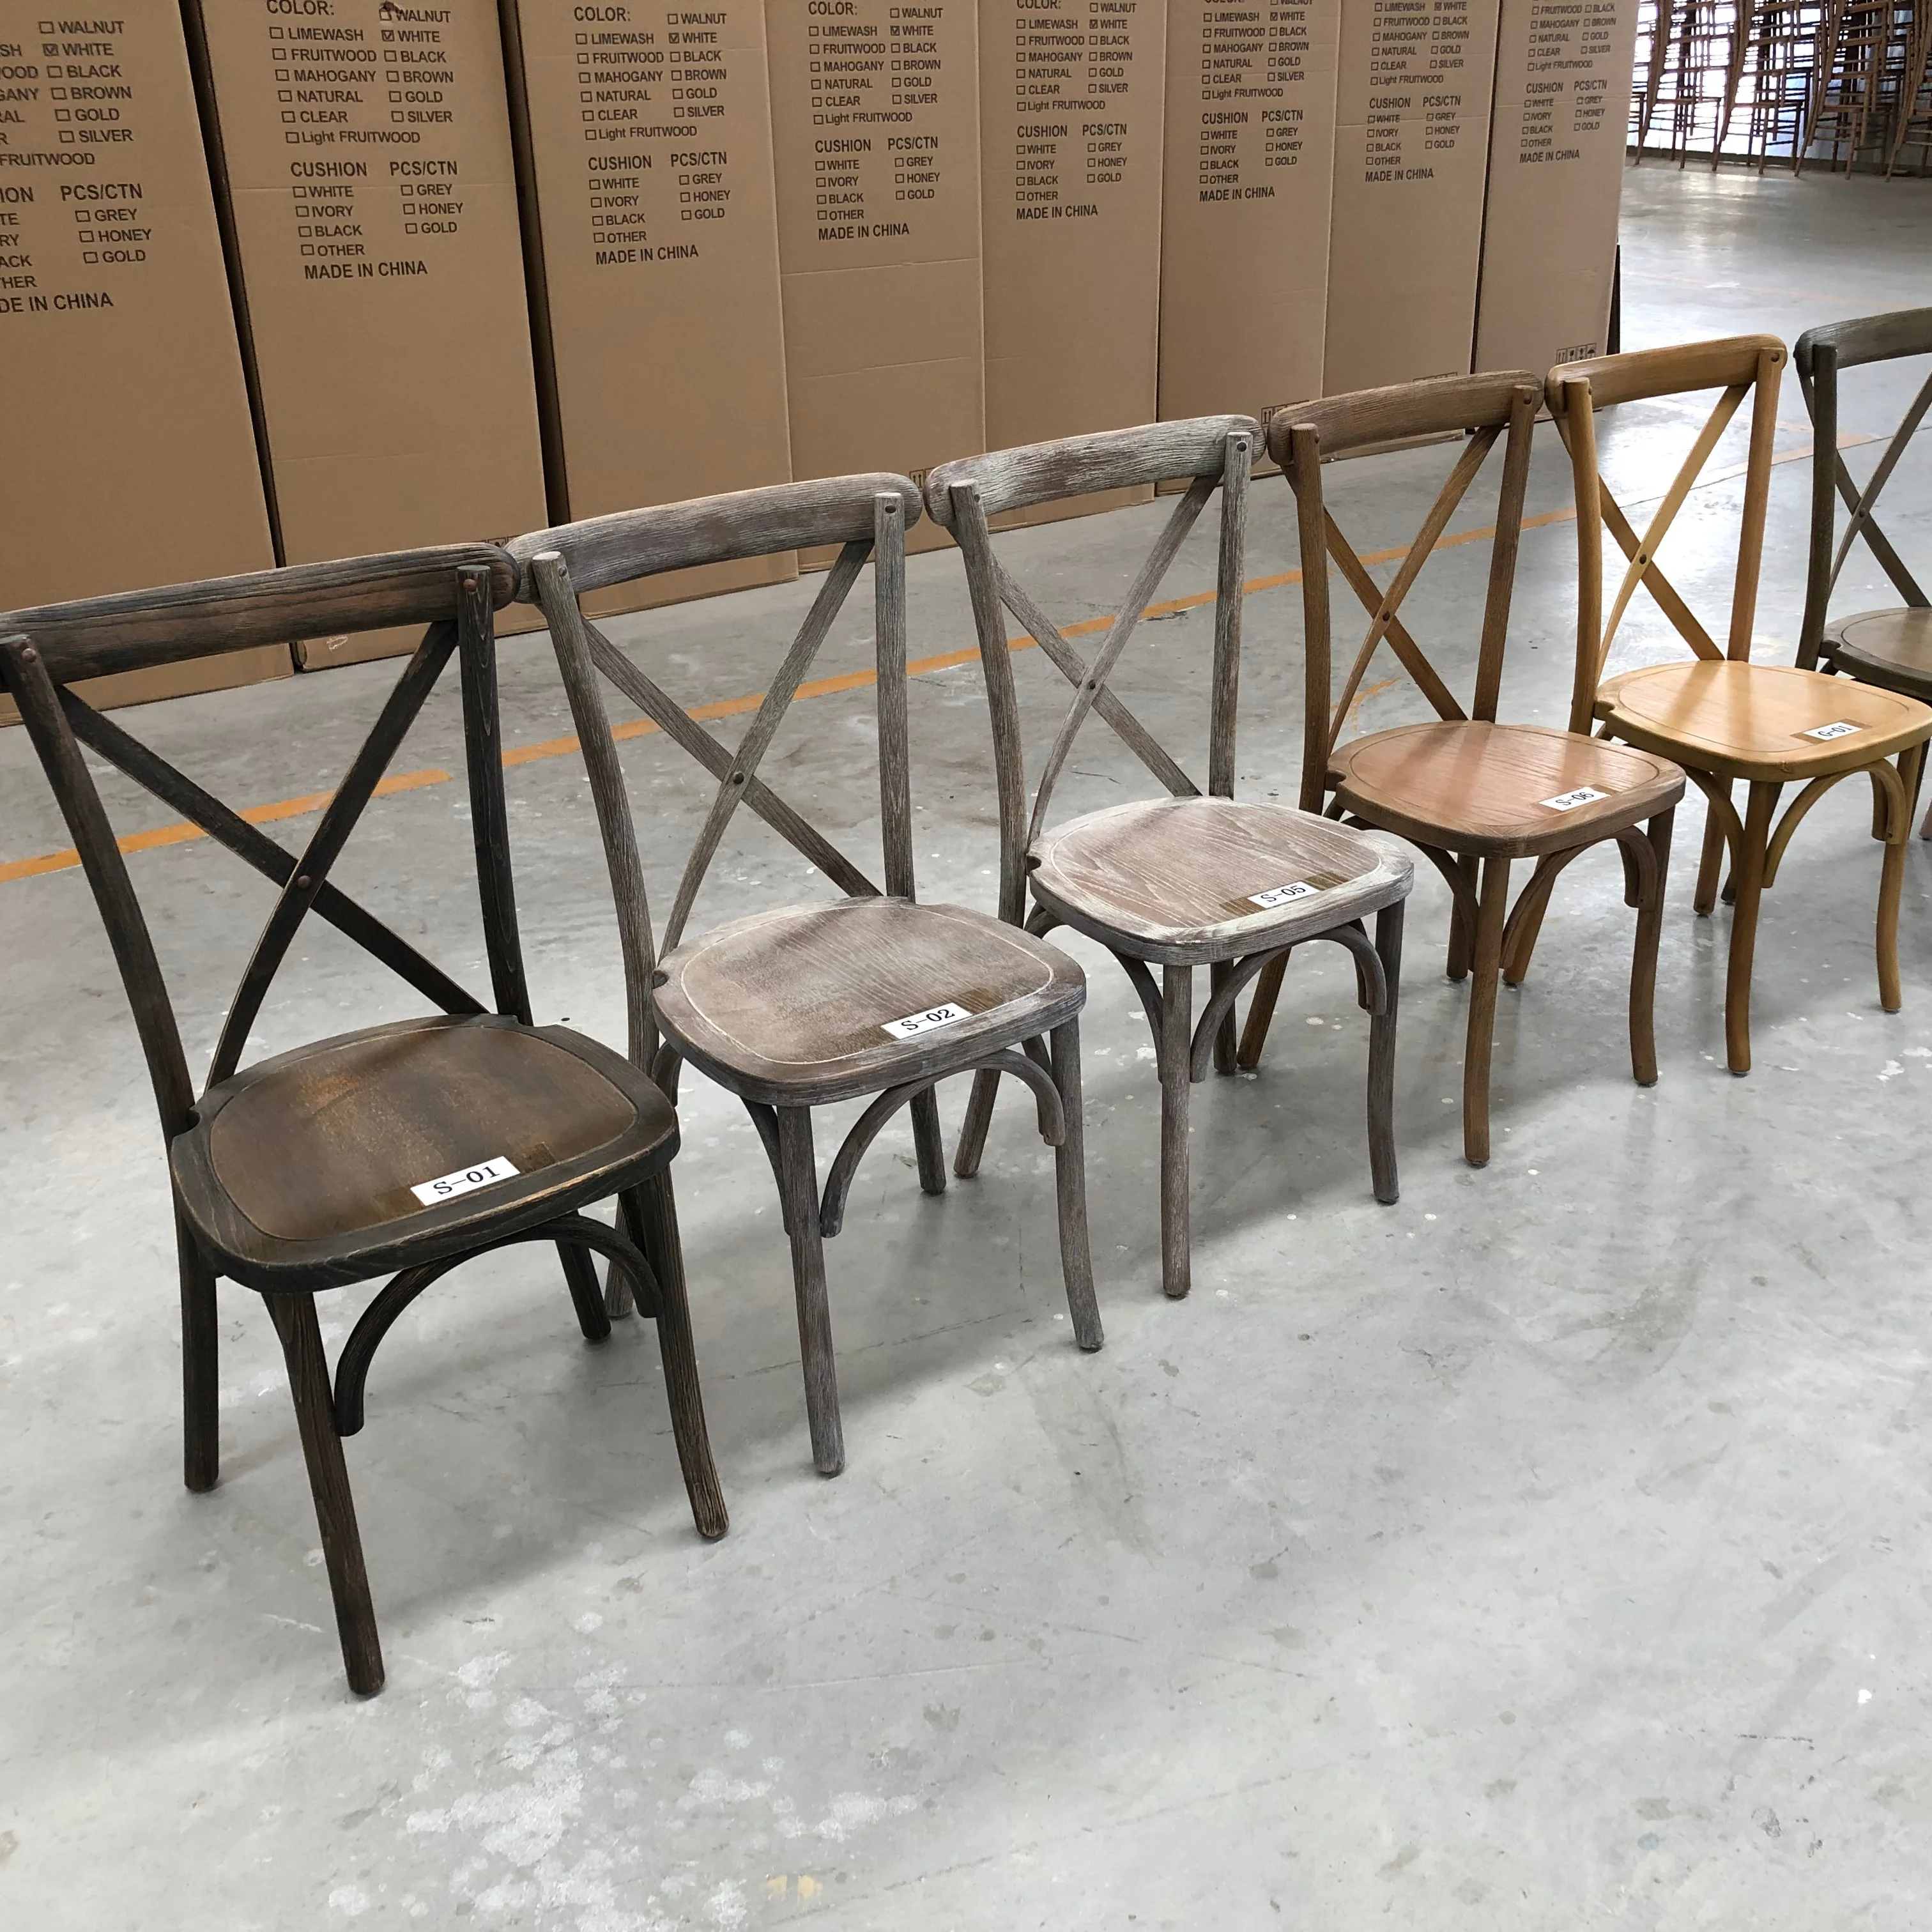 Wholesale High Quality X Cross Back Dining Chair Colorful Tuscan Crossback Chair Buy Cross Back Chair Dining Chair Wedding Chair Product On Alibaba Com